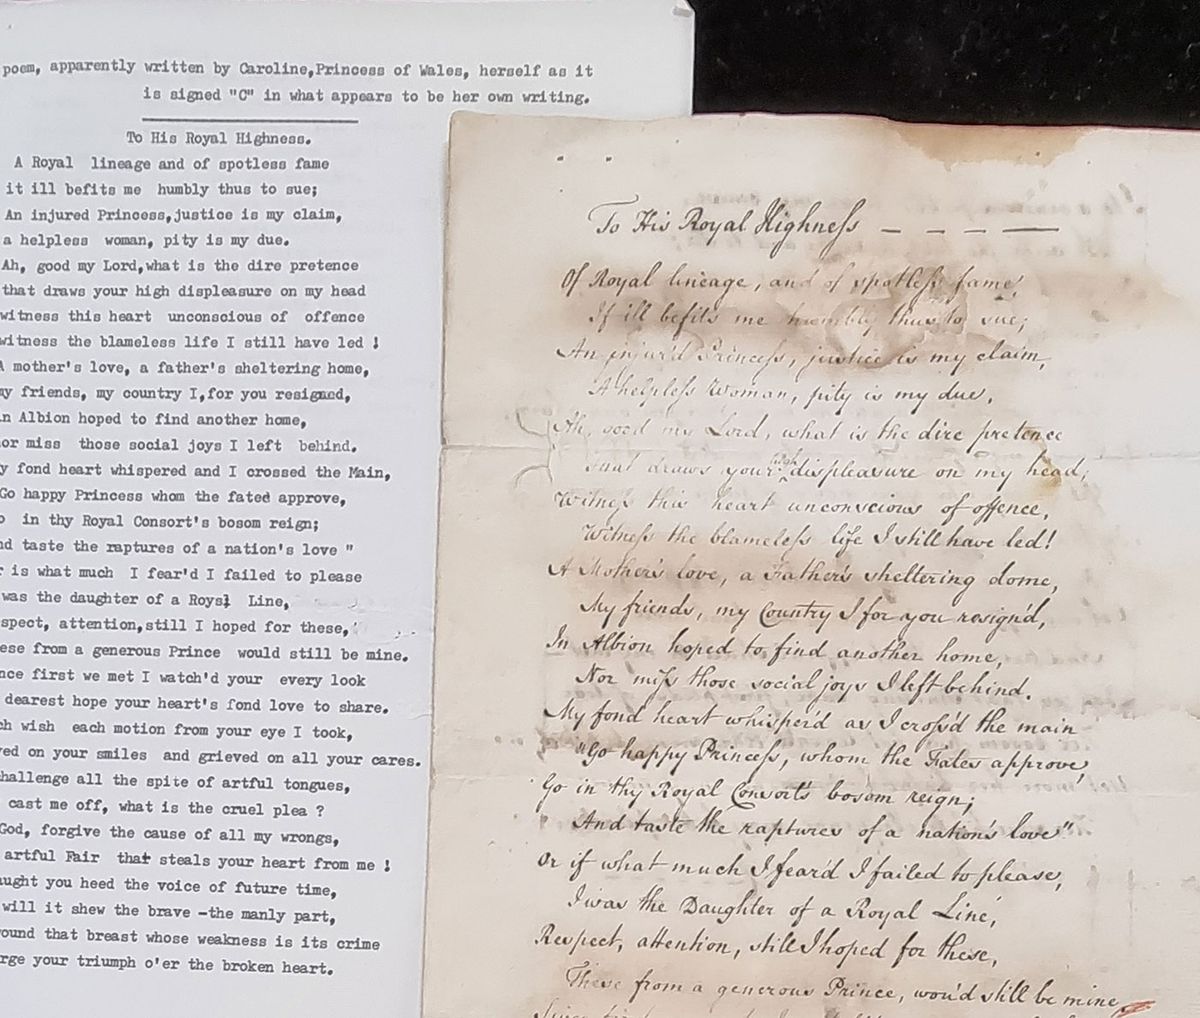 "A fascinating mystery”: the manuscript and typed transcript of "To His Royal Highness", part of a recent bequest to Cambridge University Library of materials relating to the troubled marriage of George IV and Caroline of Brunswick Cambridge University Library 